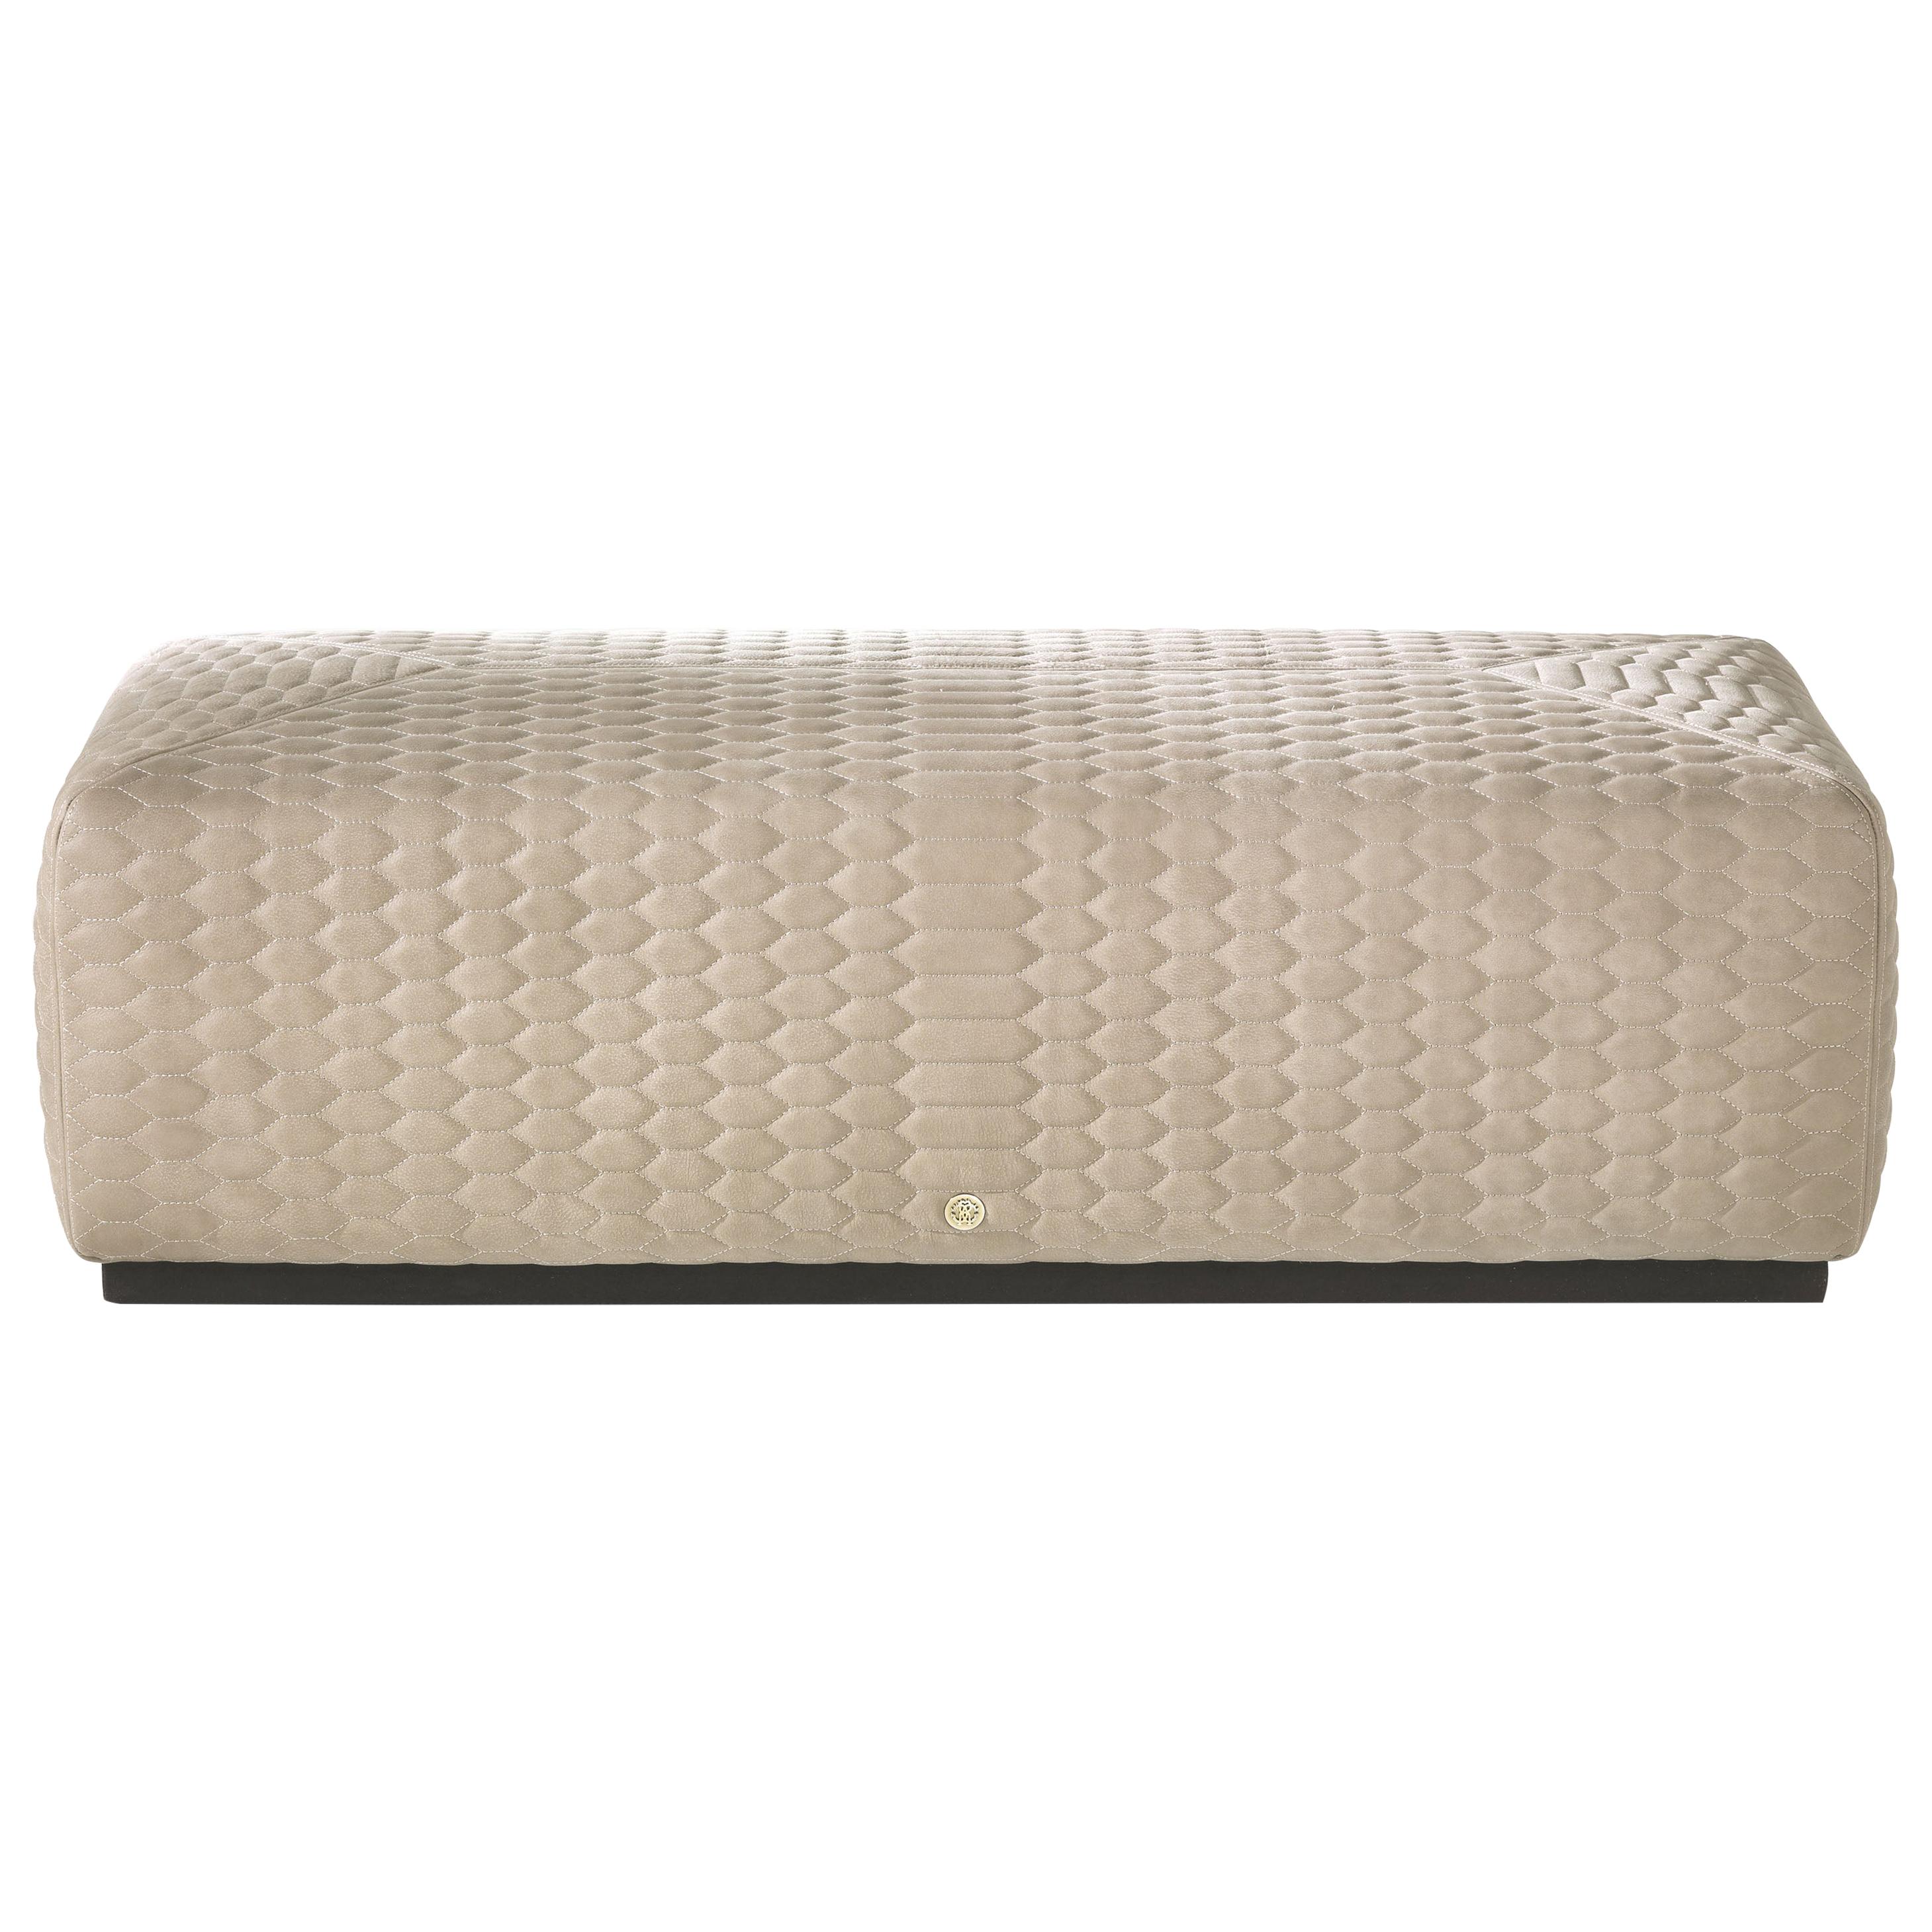 21st Century Hera Pouf in Quilted Leather by Roberto Cavalli Home Interiors